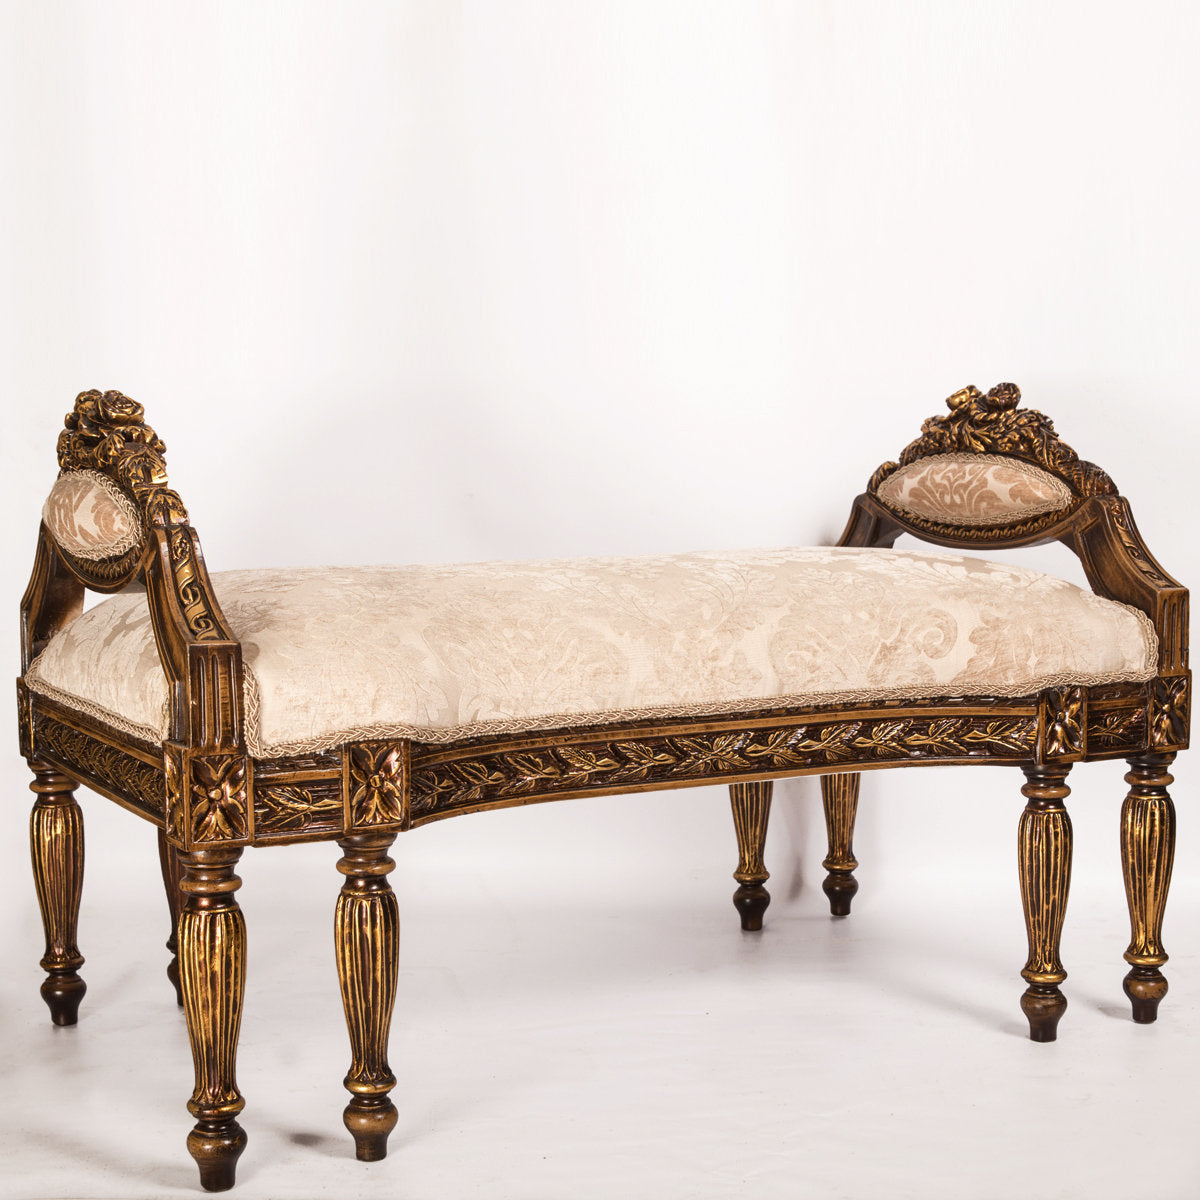 French rococo-style carved bench